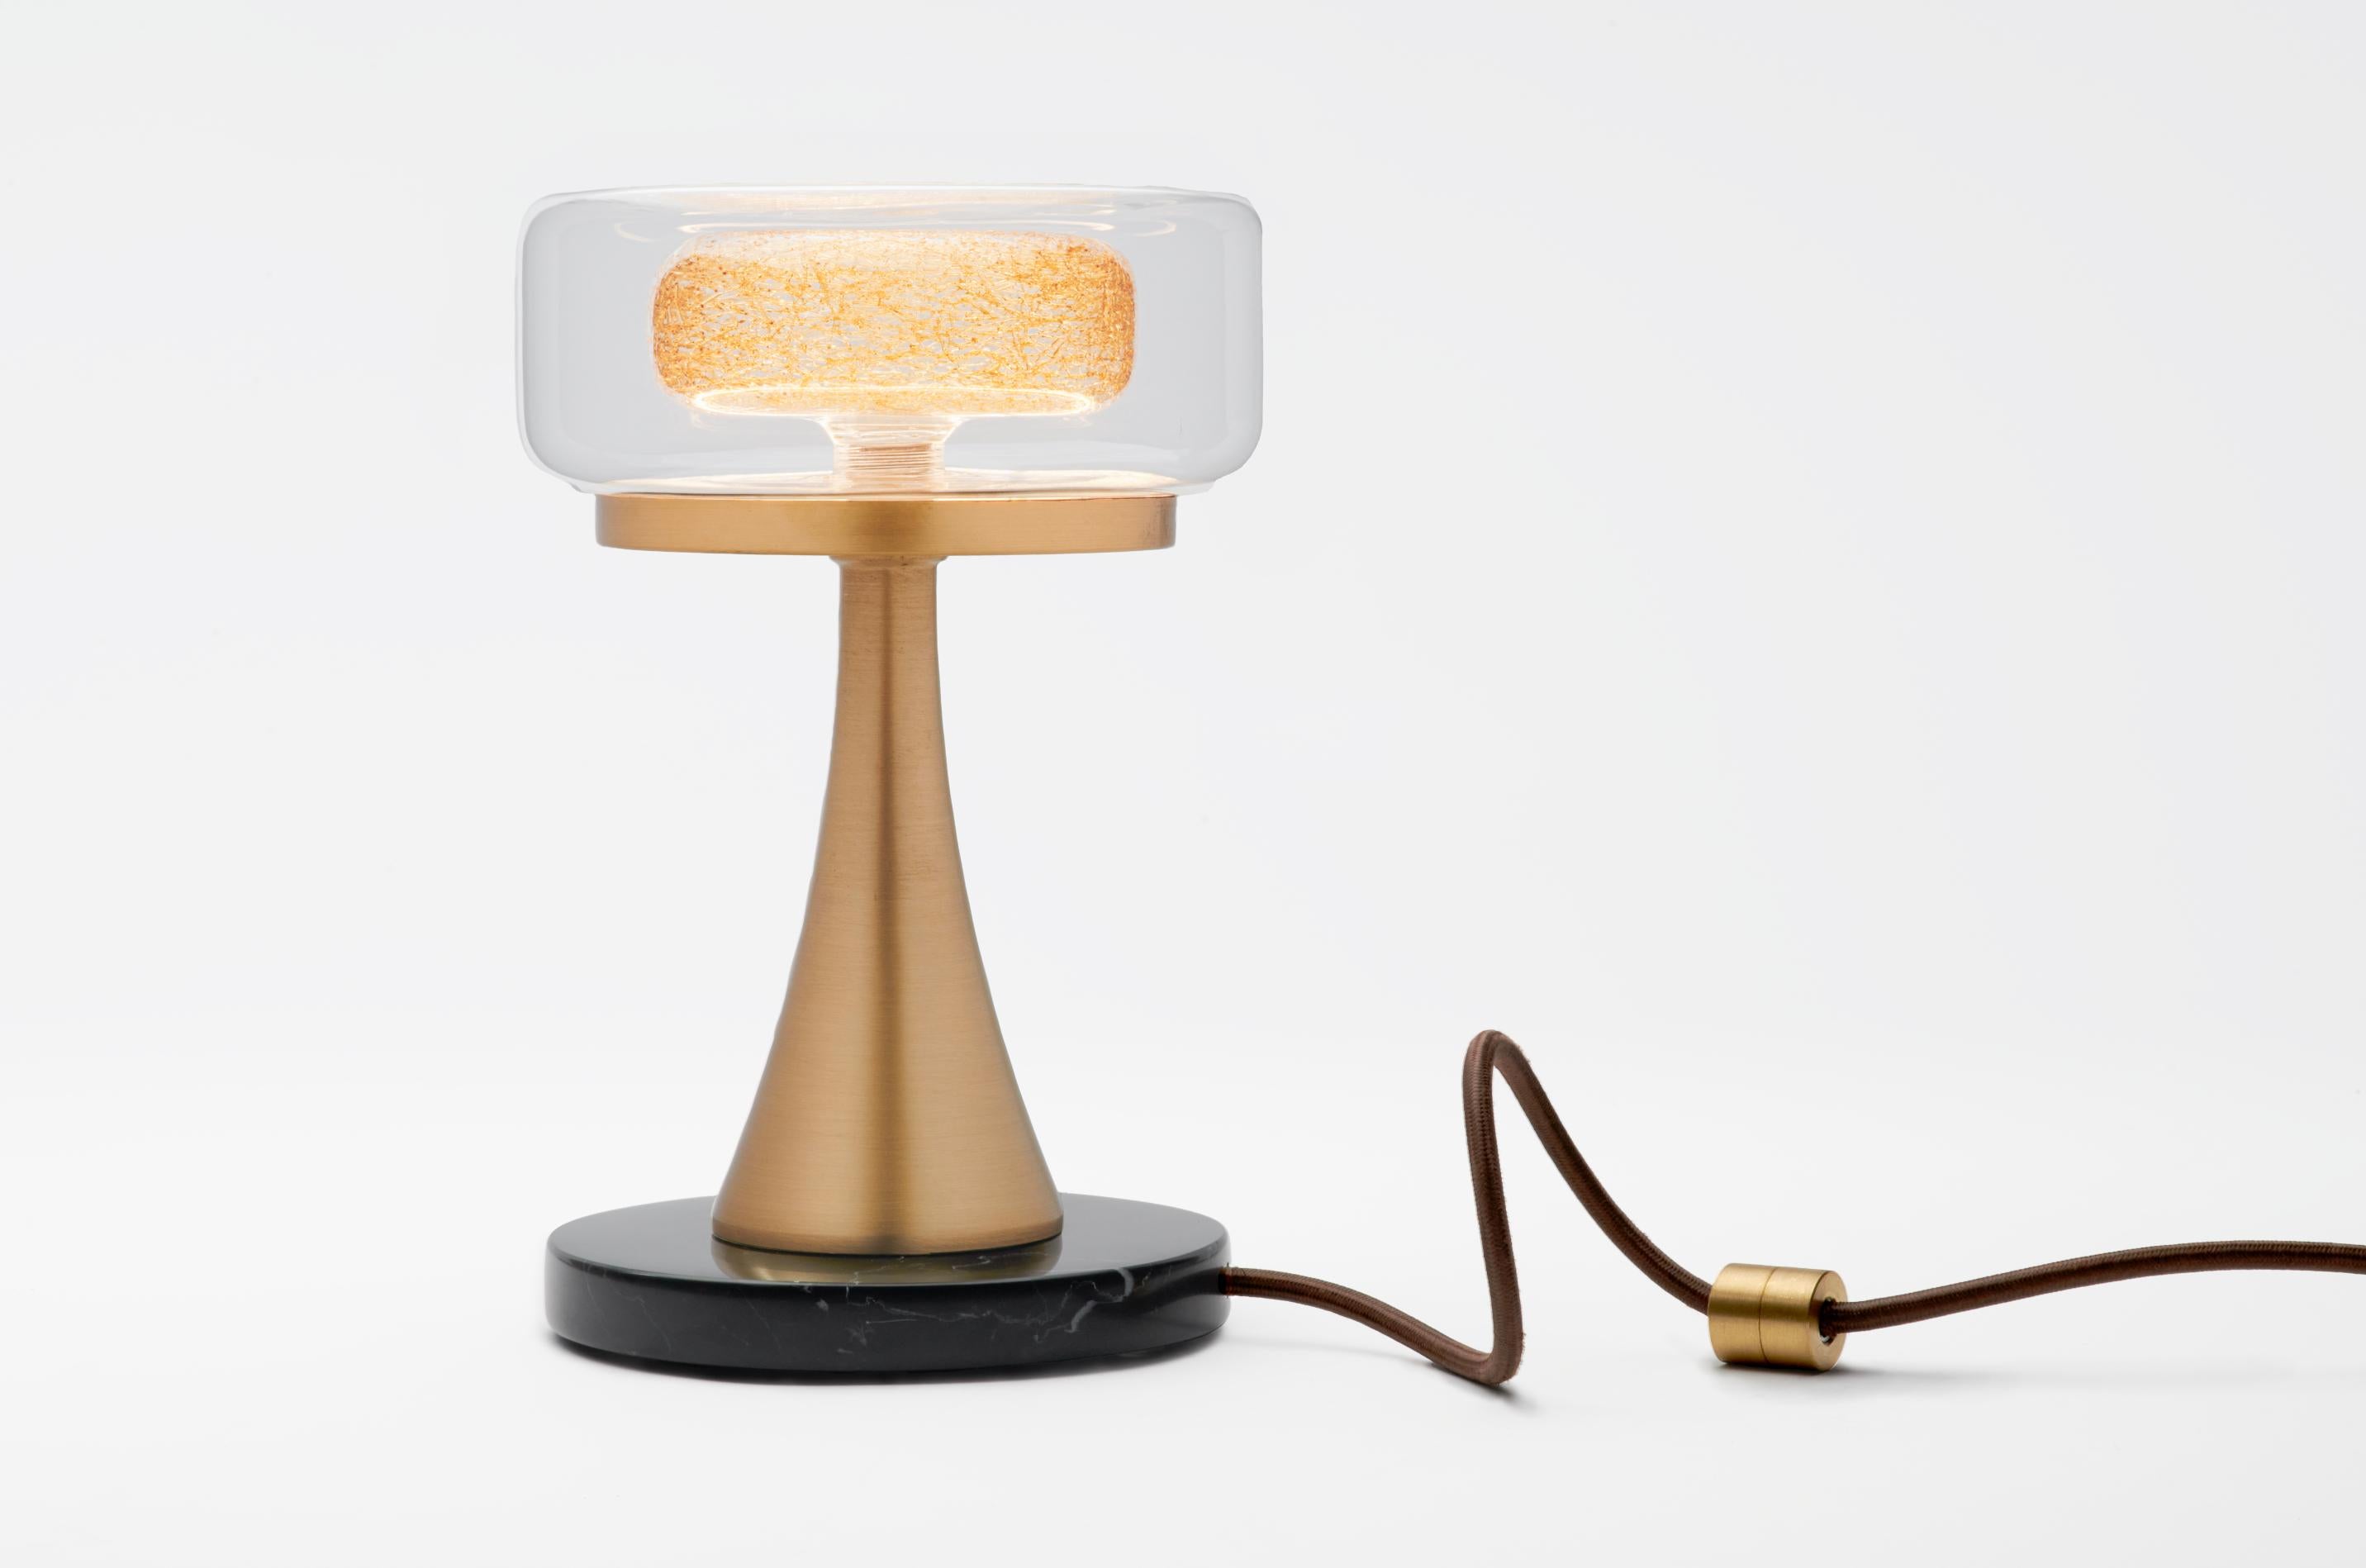 The Halo table lamp's ingenious design consists of glass, metal, and marble parts. The double glass pendant (our Halo design) rests on a metal plate, which is in turn balanced on cone shaped metal attached to a round marble base. The lamp is